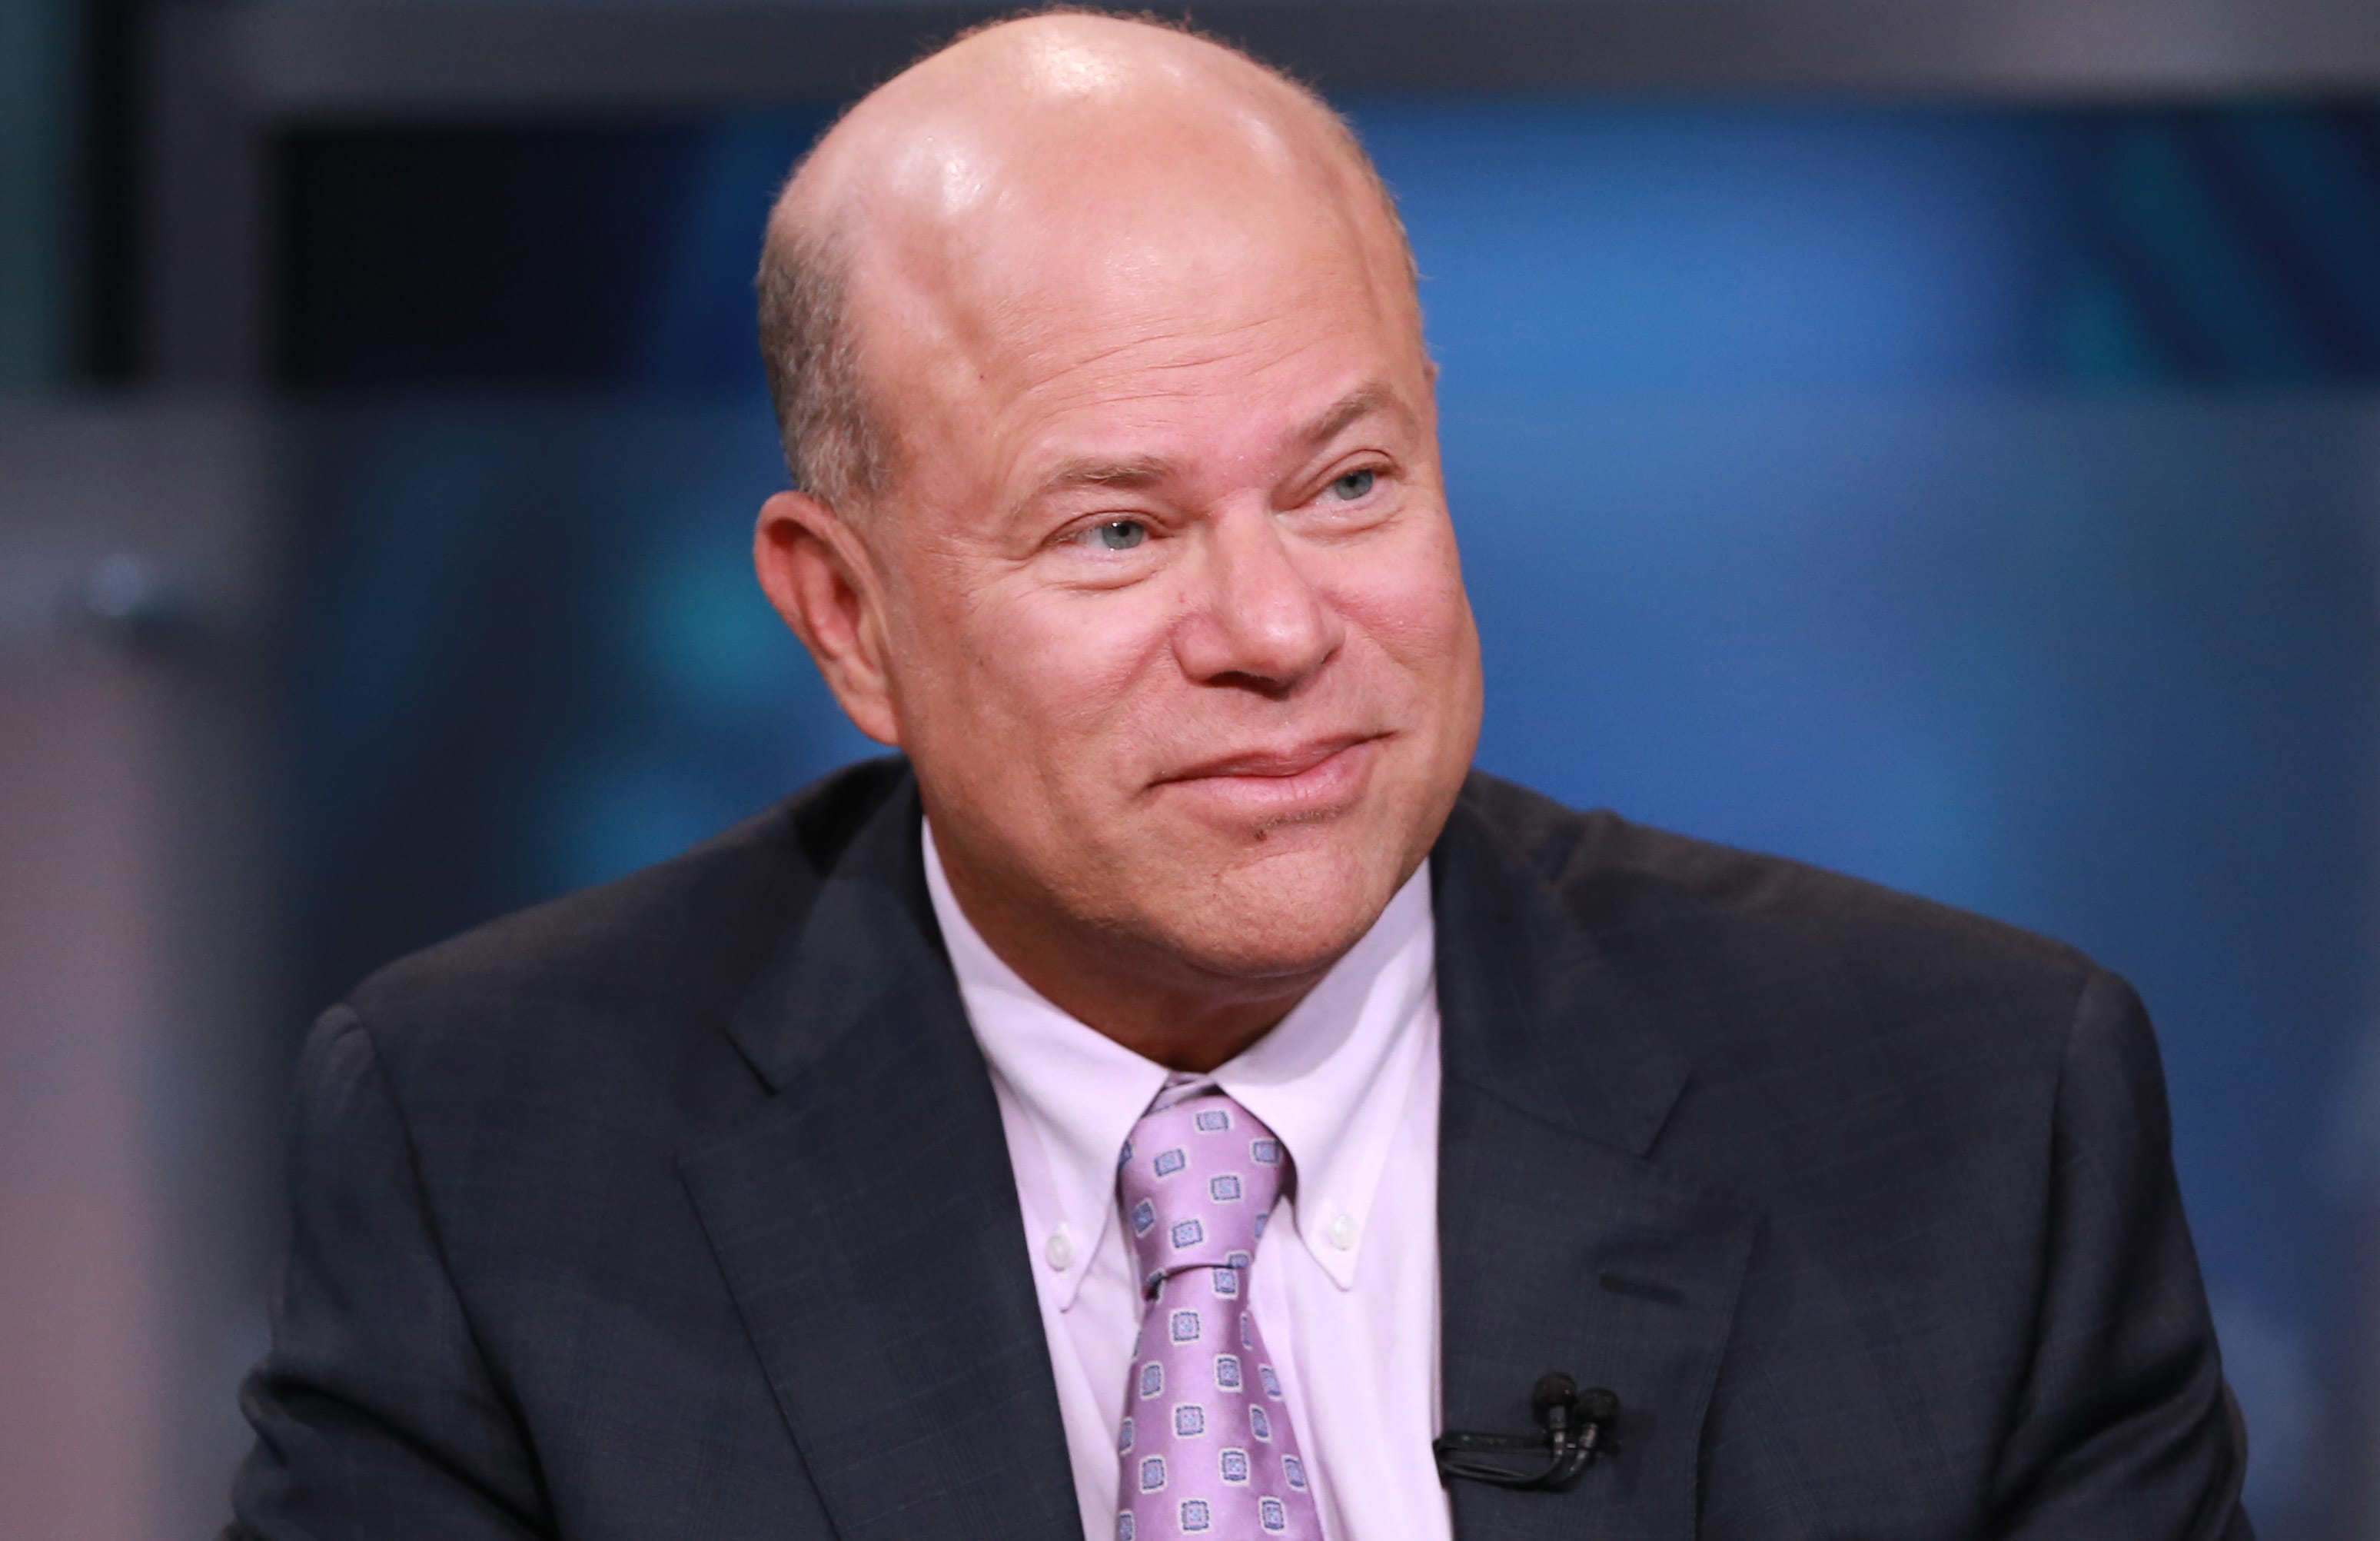 David Tepper trimmed tech stocks and bet on energy in the first quarter. Here are his top holdings